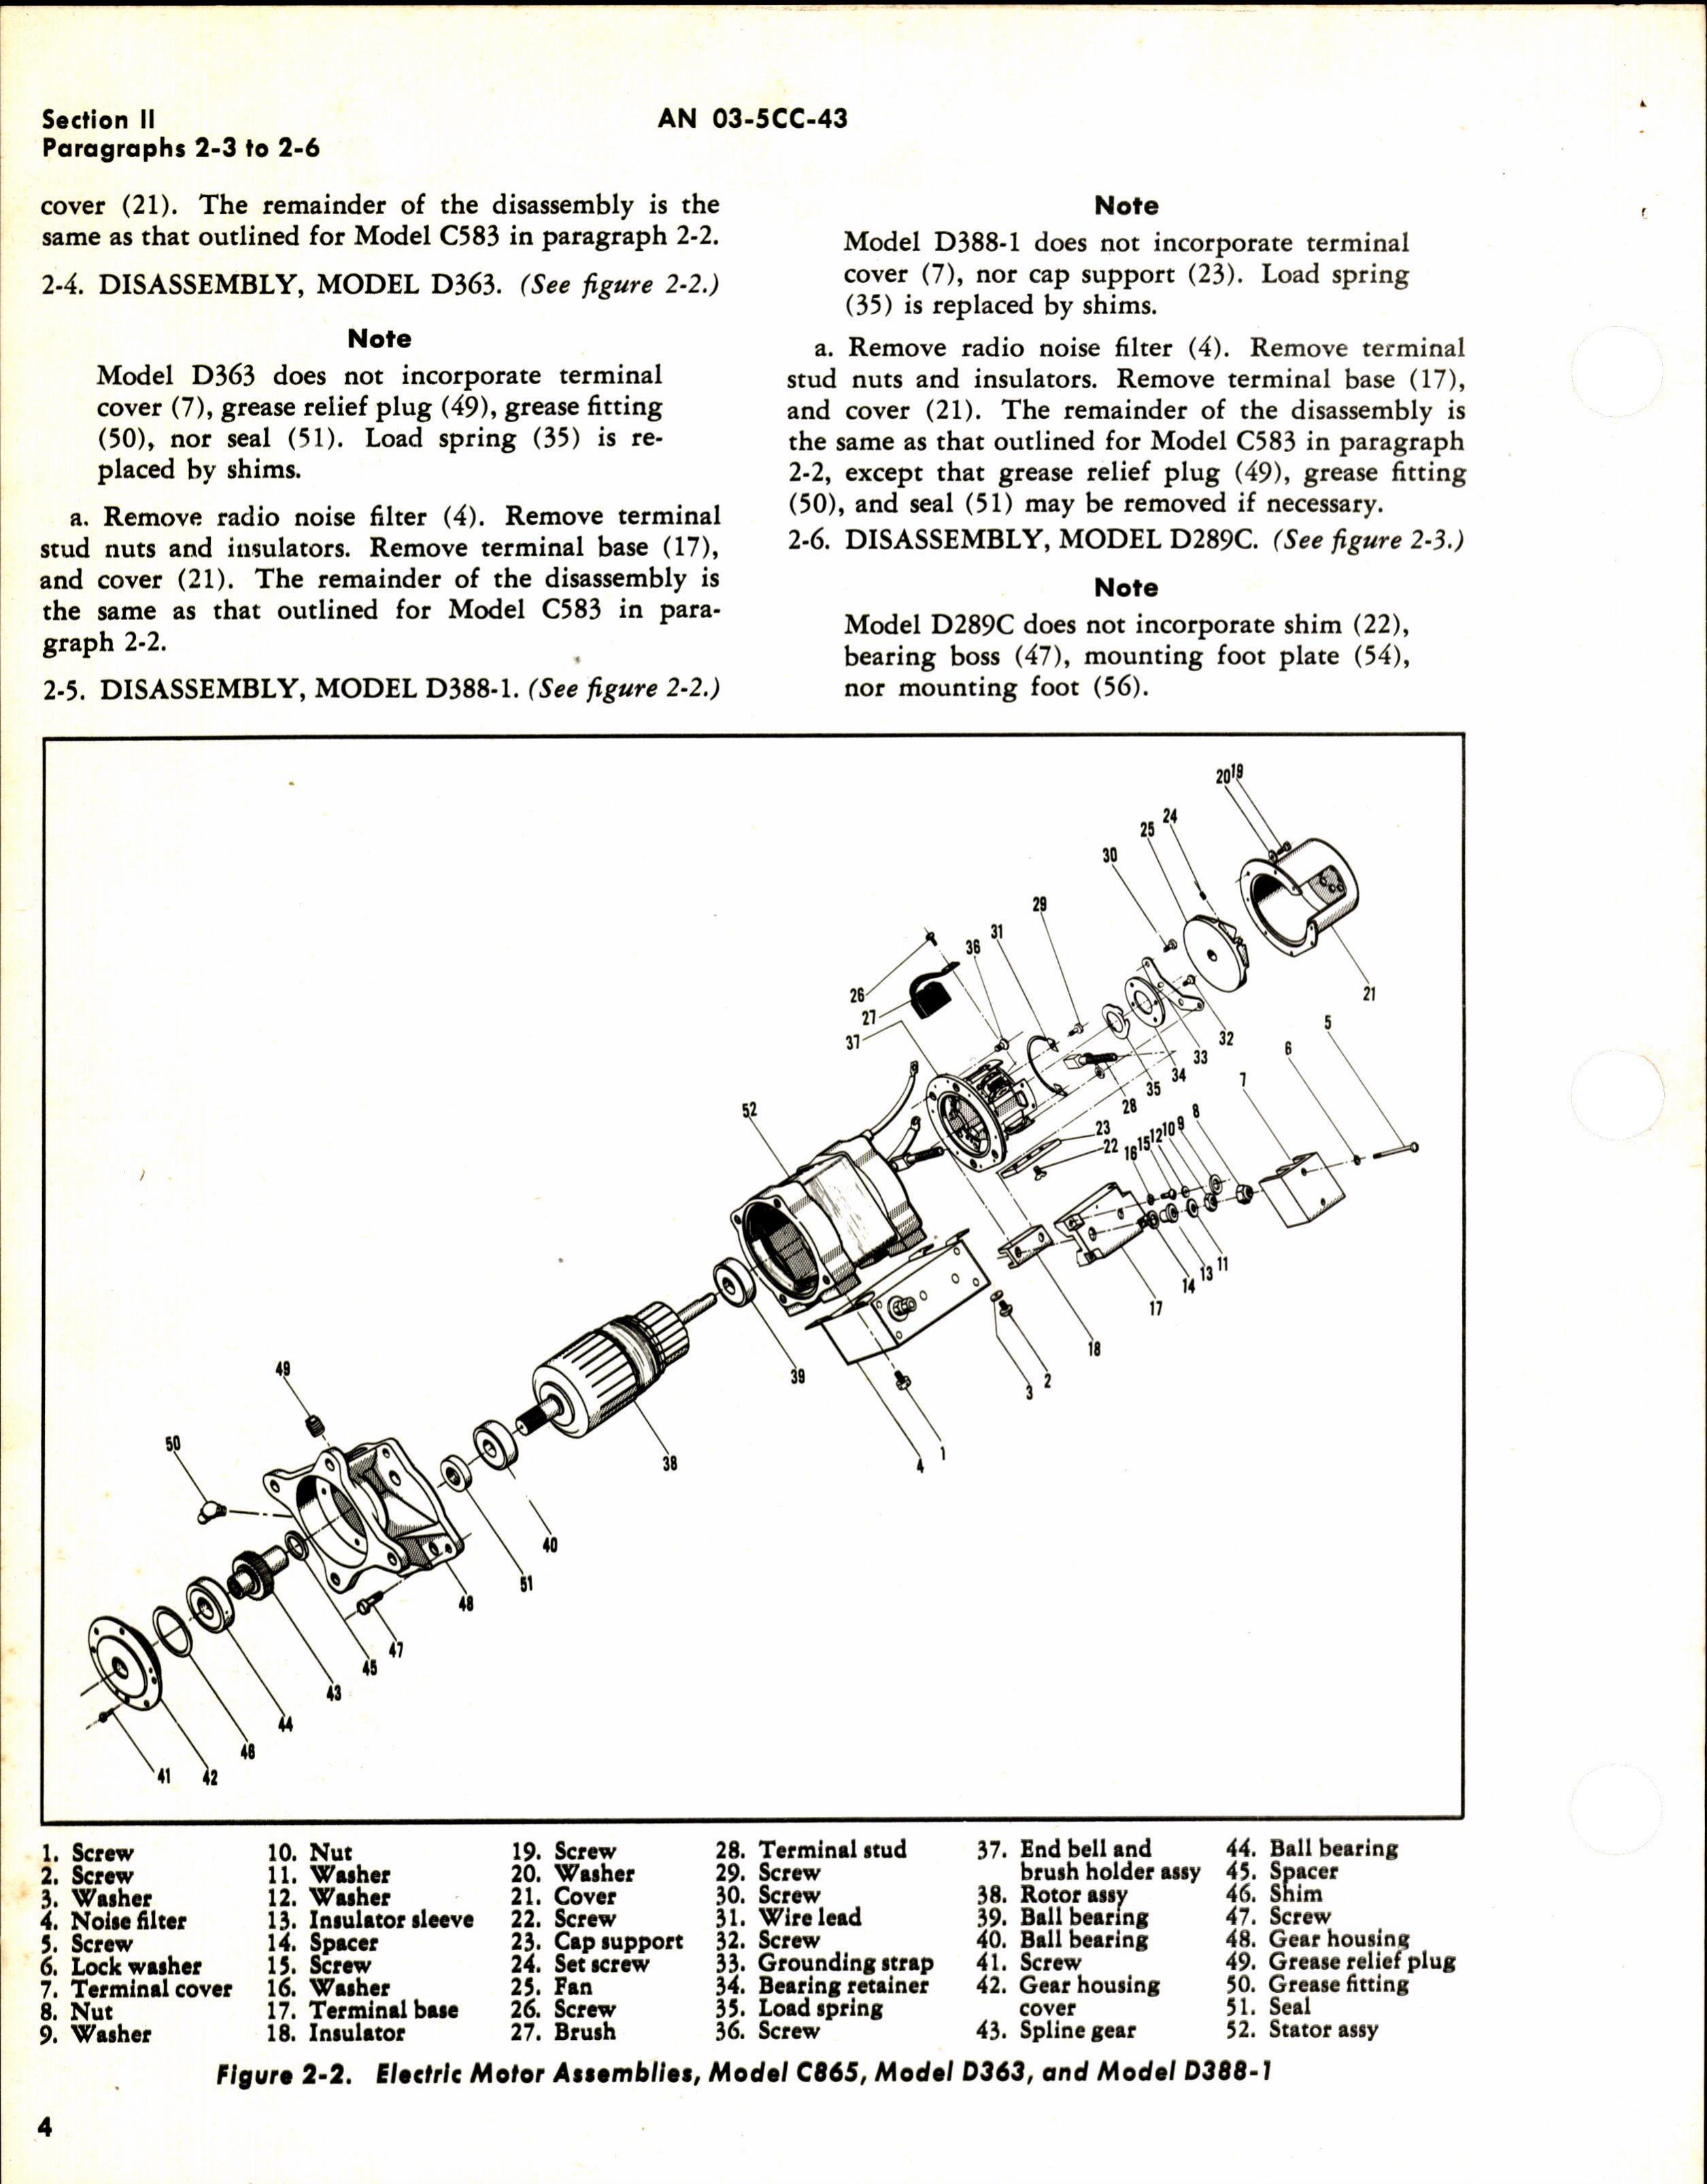 Sample page 8 from AirCorps Library document: Overhaul Instructions for Electrical Engineering & Mfg. Co. Electric Motors